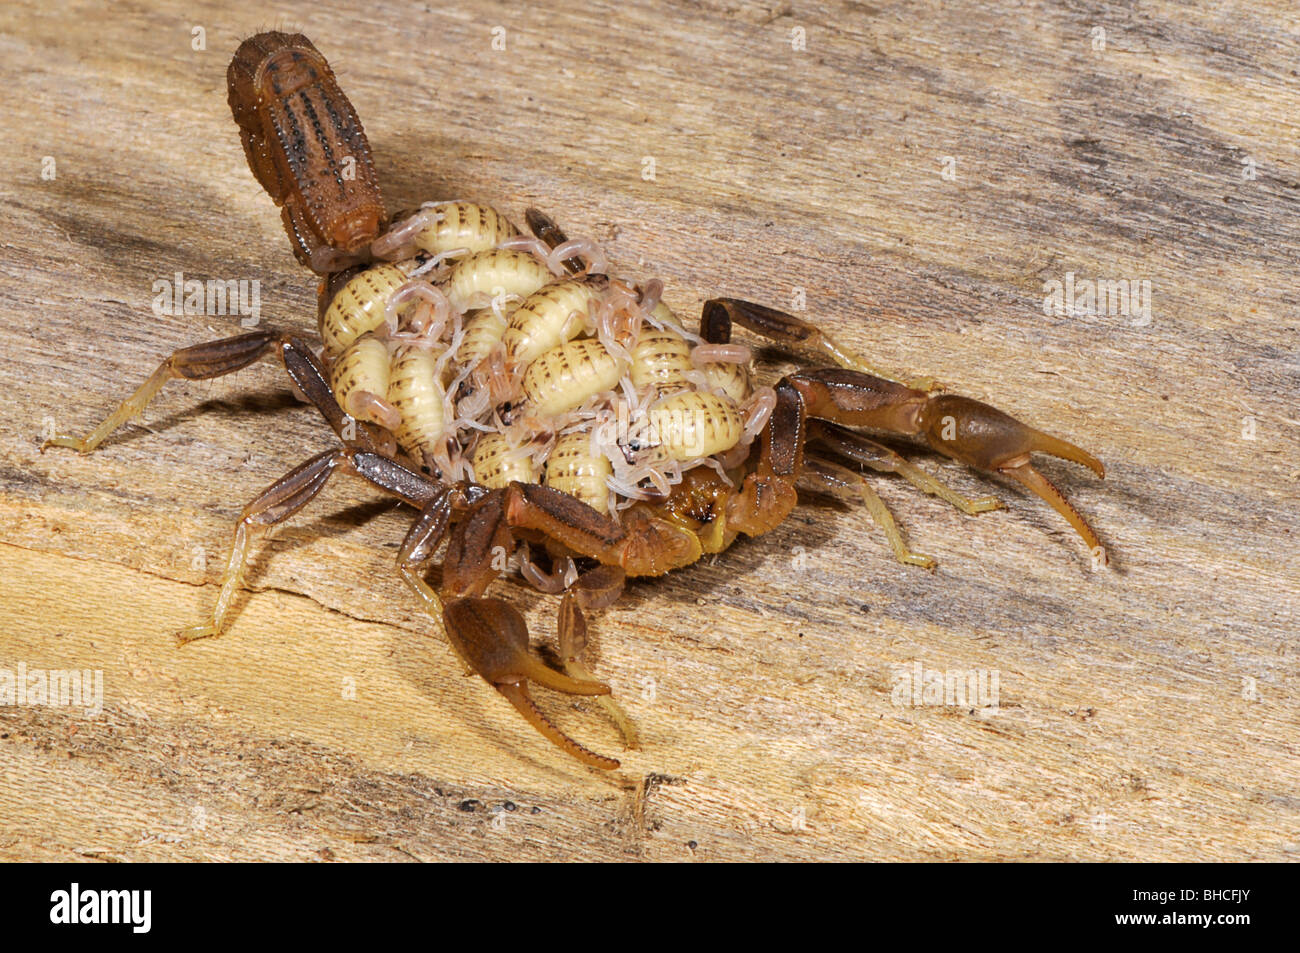 Hottentota scorpion, carrying its young, photographed in Tanzania, Africa Stock Photo